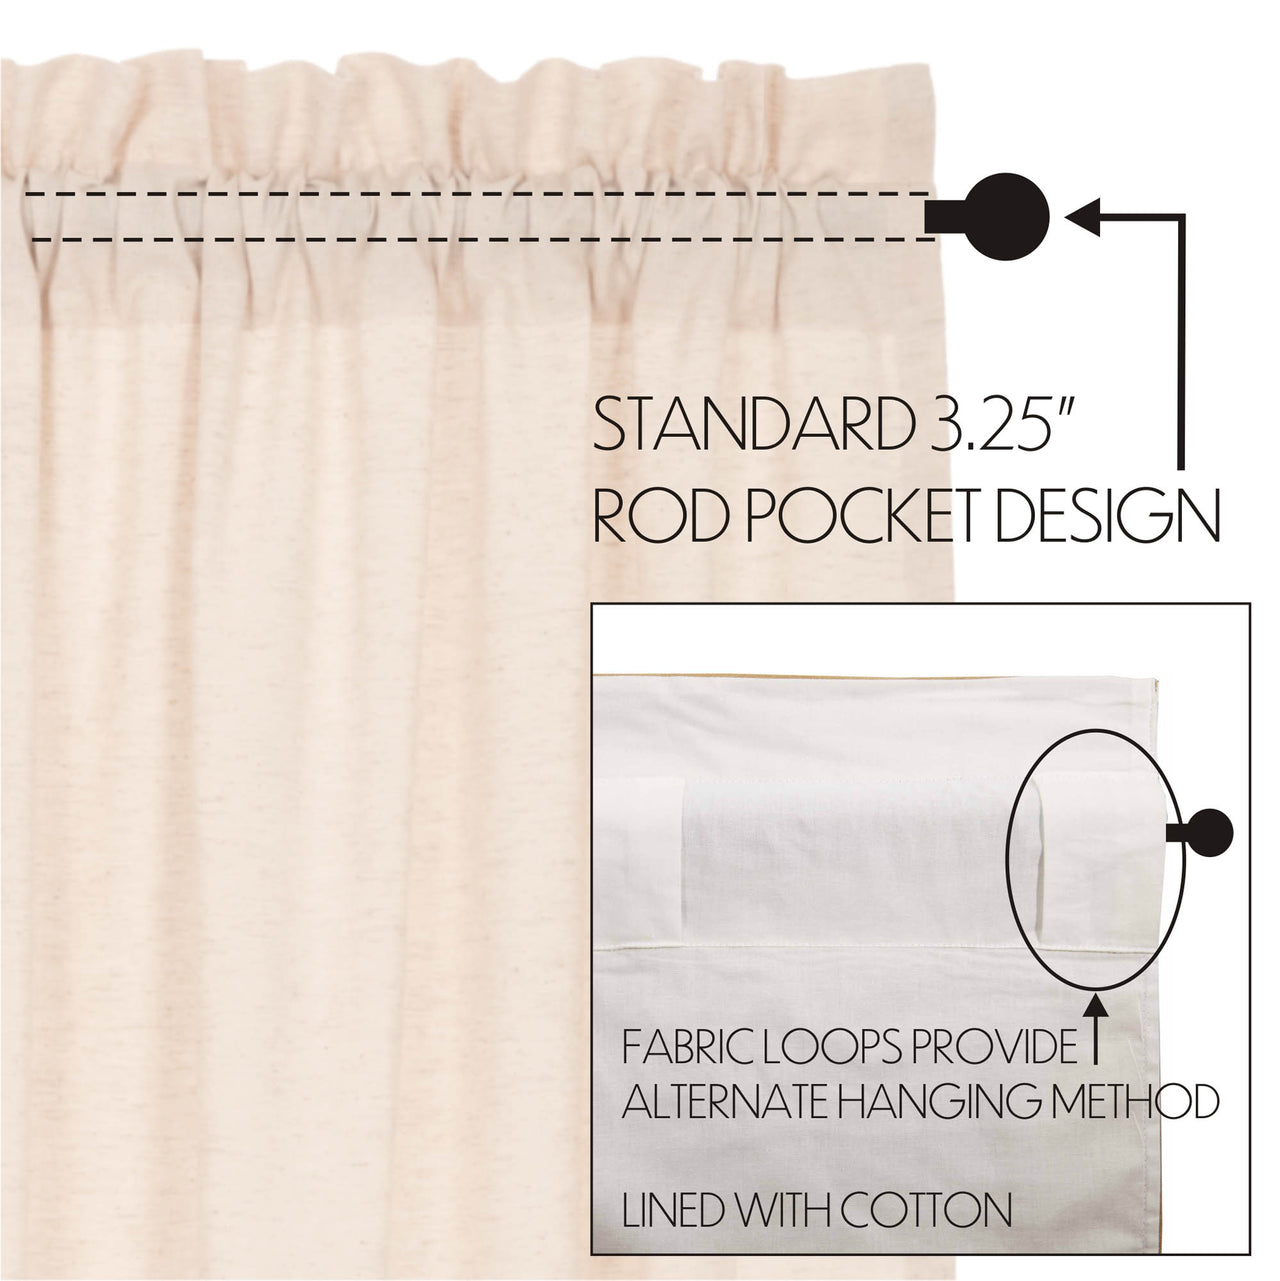 Simple Life Flax Natural Valance Curtain 16x60 VHC Brands